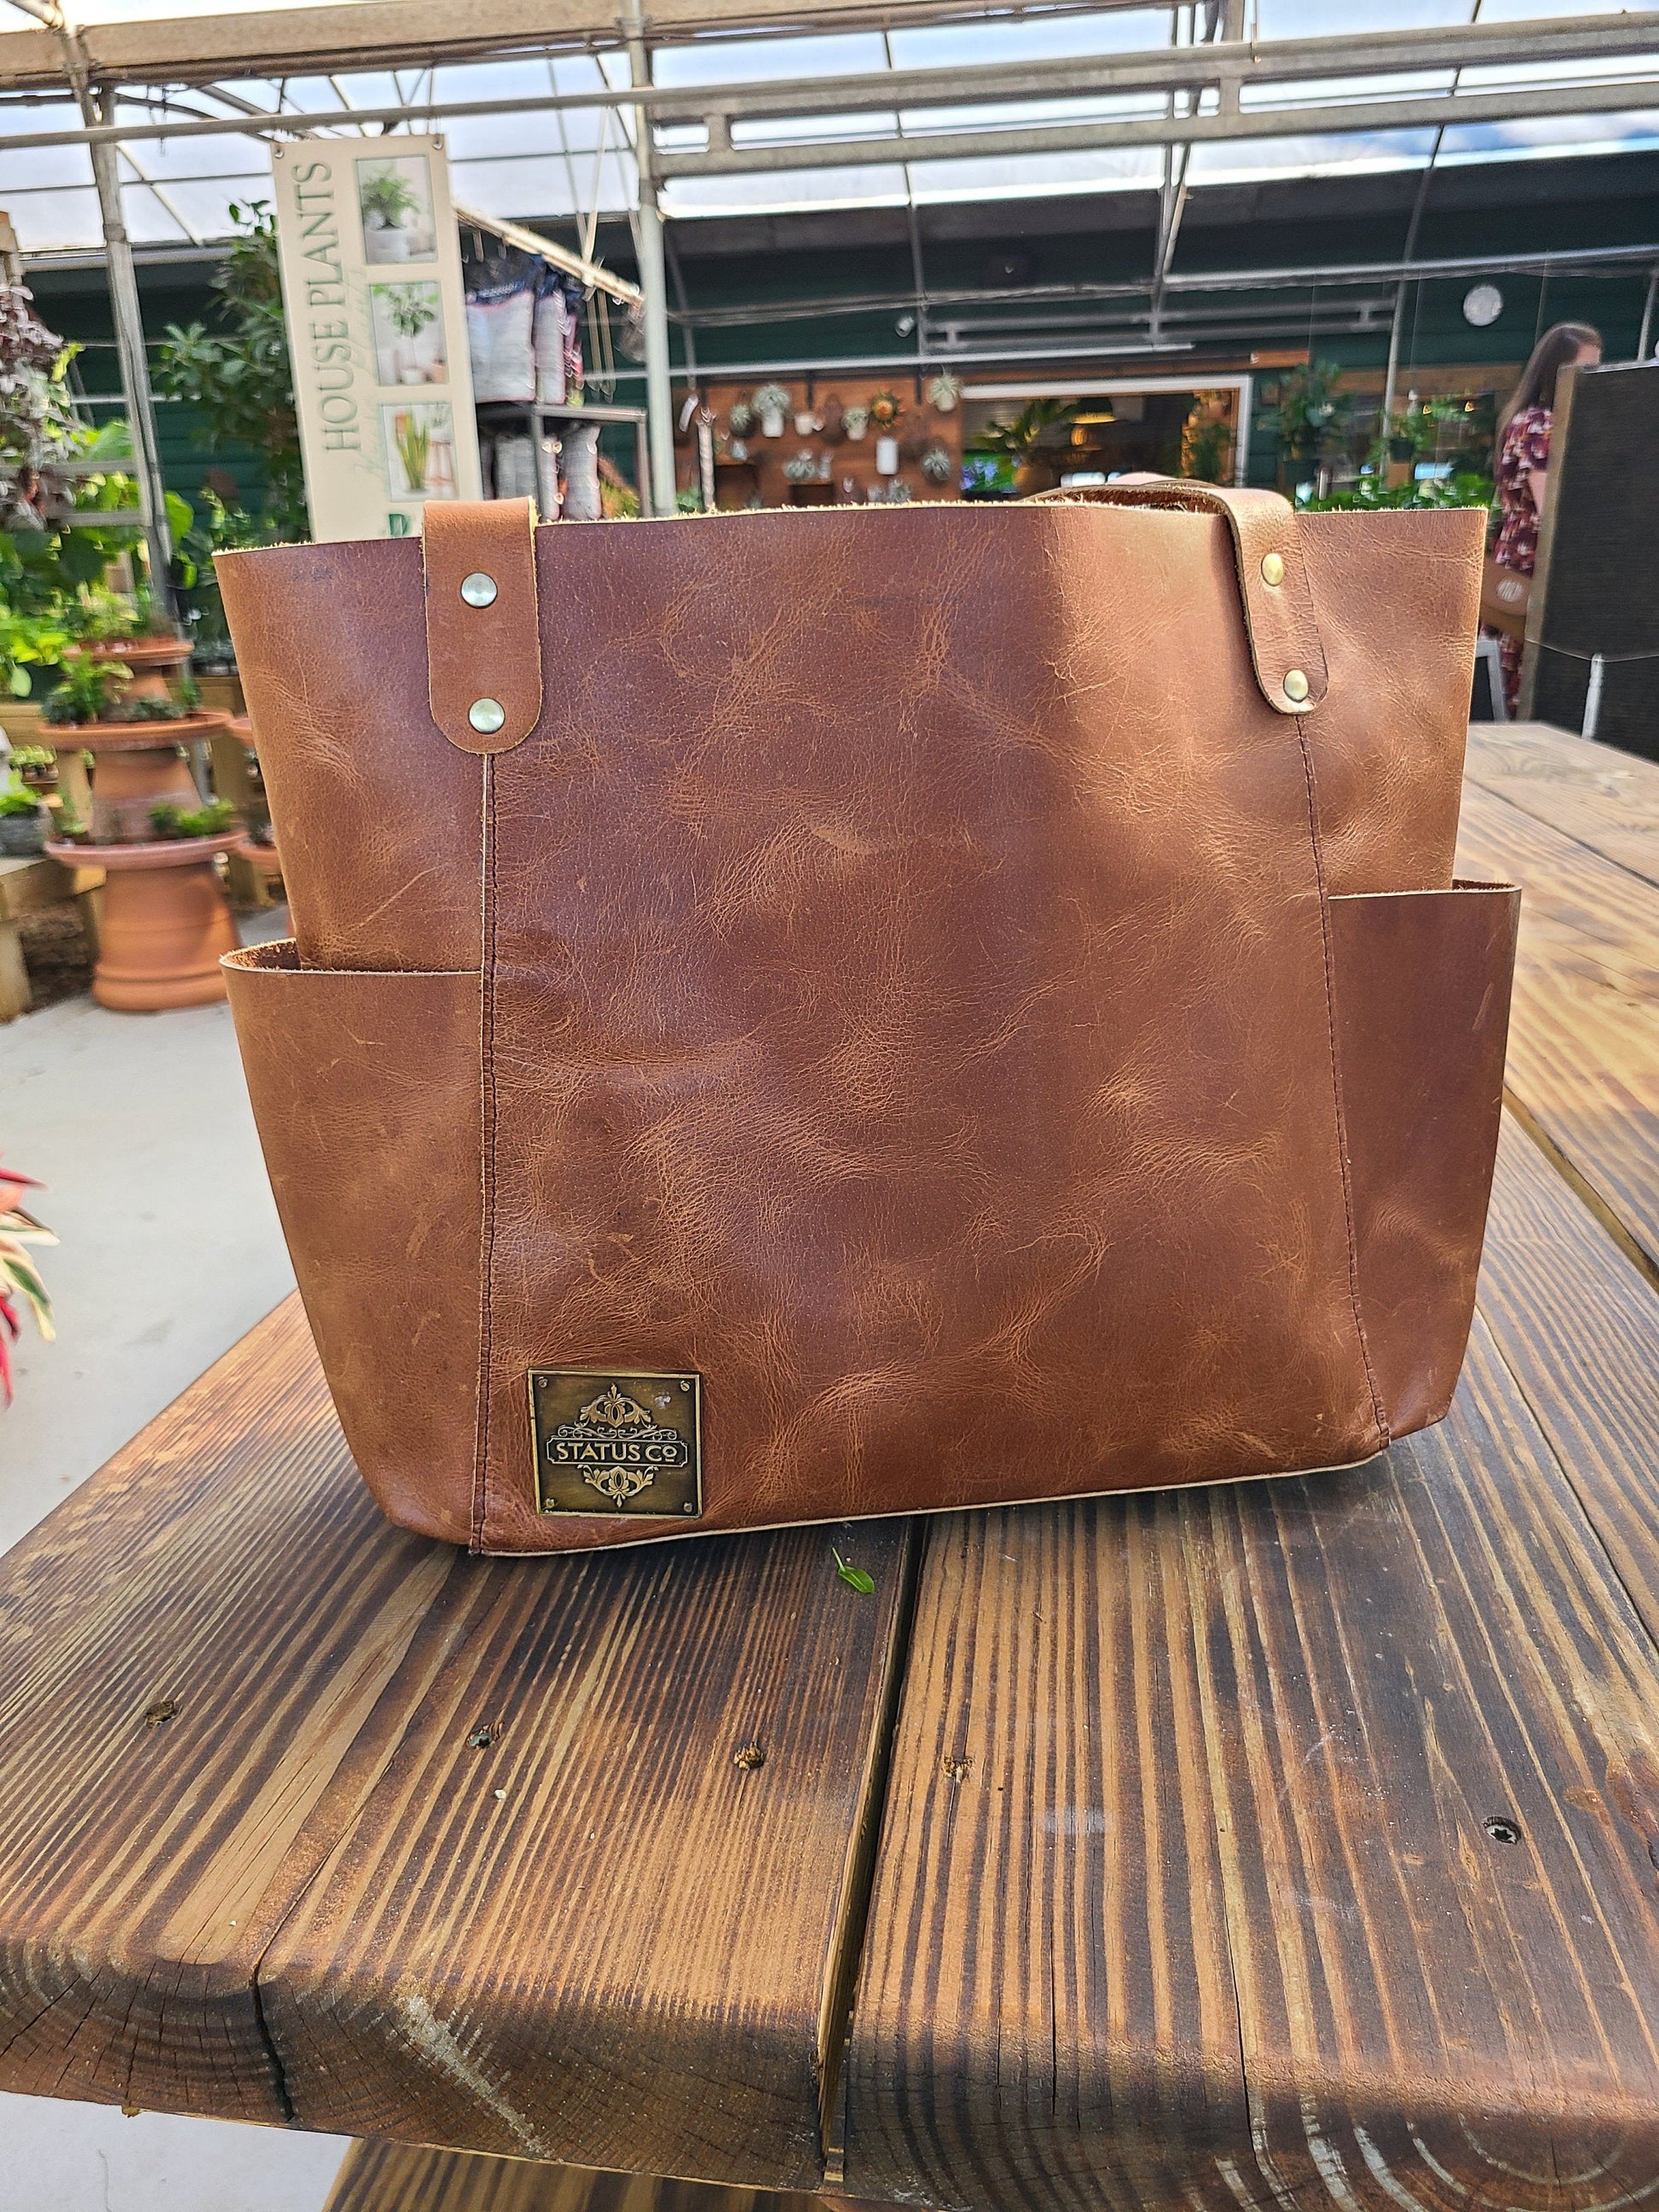 Women's Leather Tote Bag - Women's Leather Handbag - Leather Bag Woman - Shoulder Bag - Leather Tote Bag For Women - Leather Handbag-Status Co. Leather Studio